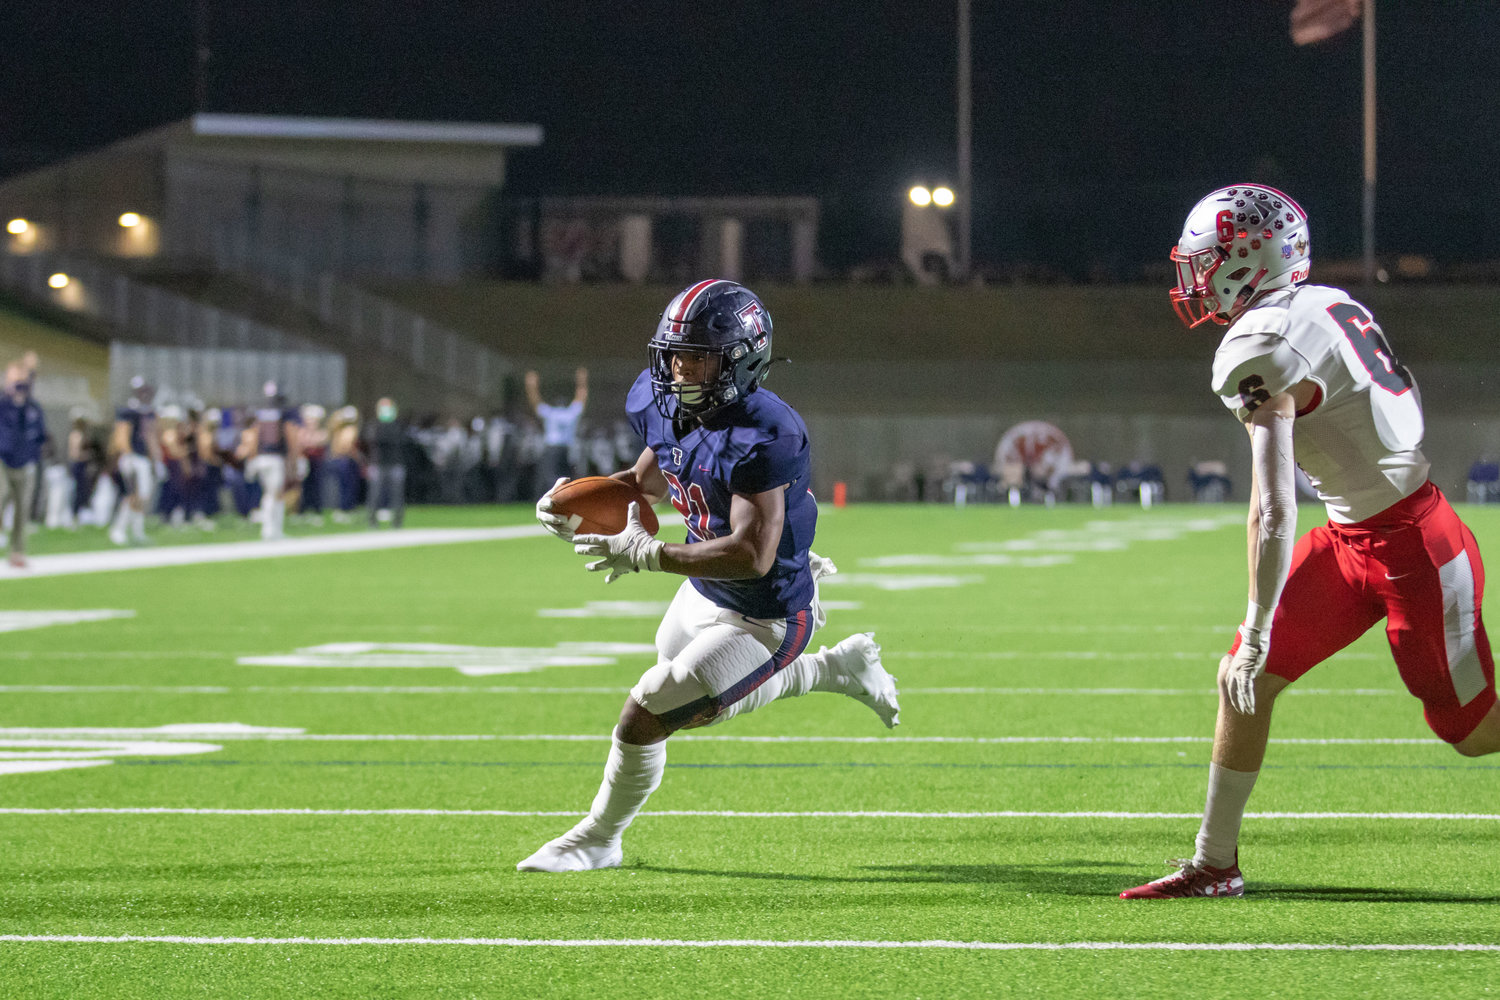 Tompkins senior running back Sherman Smith runs to score a touchdown during the Falcons' 42-10 Class 6A Division I bi-district playoff win over Fort Bend Travis on Dec. 11 at Legacy Stadium.